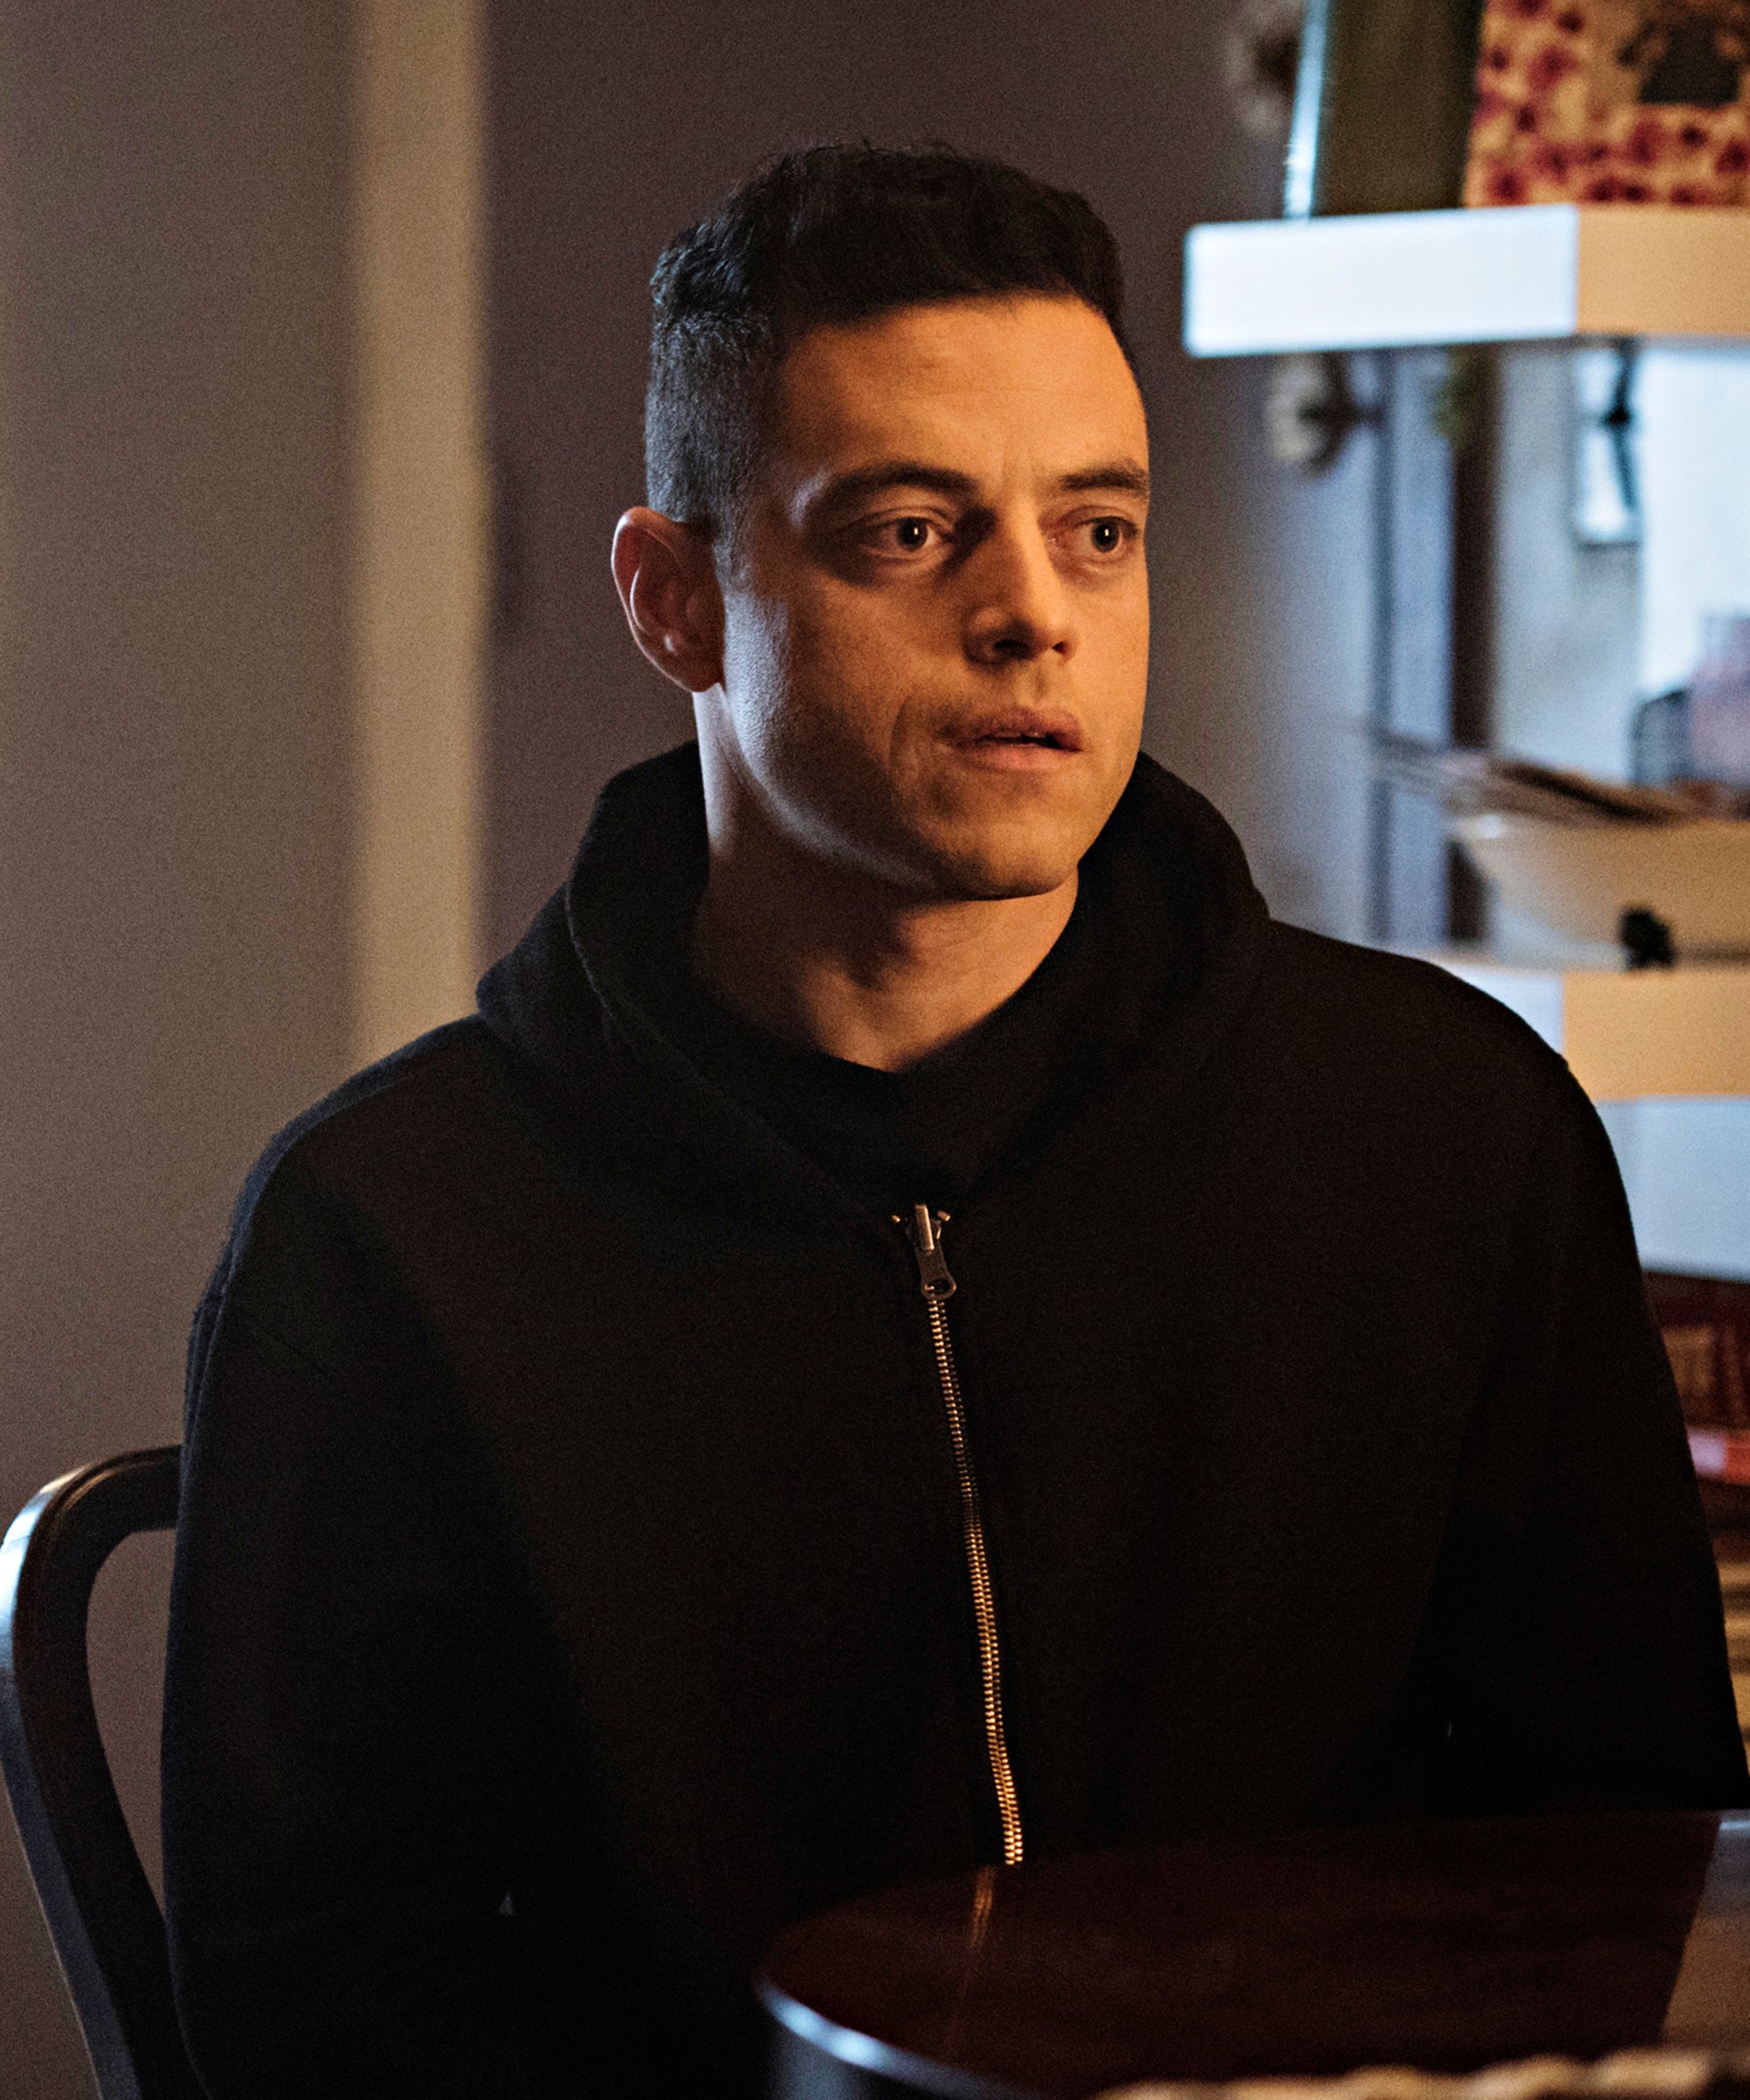 Mr. Robot' Just Changed Everything with a Shocking Reveal